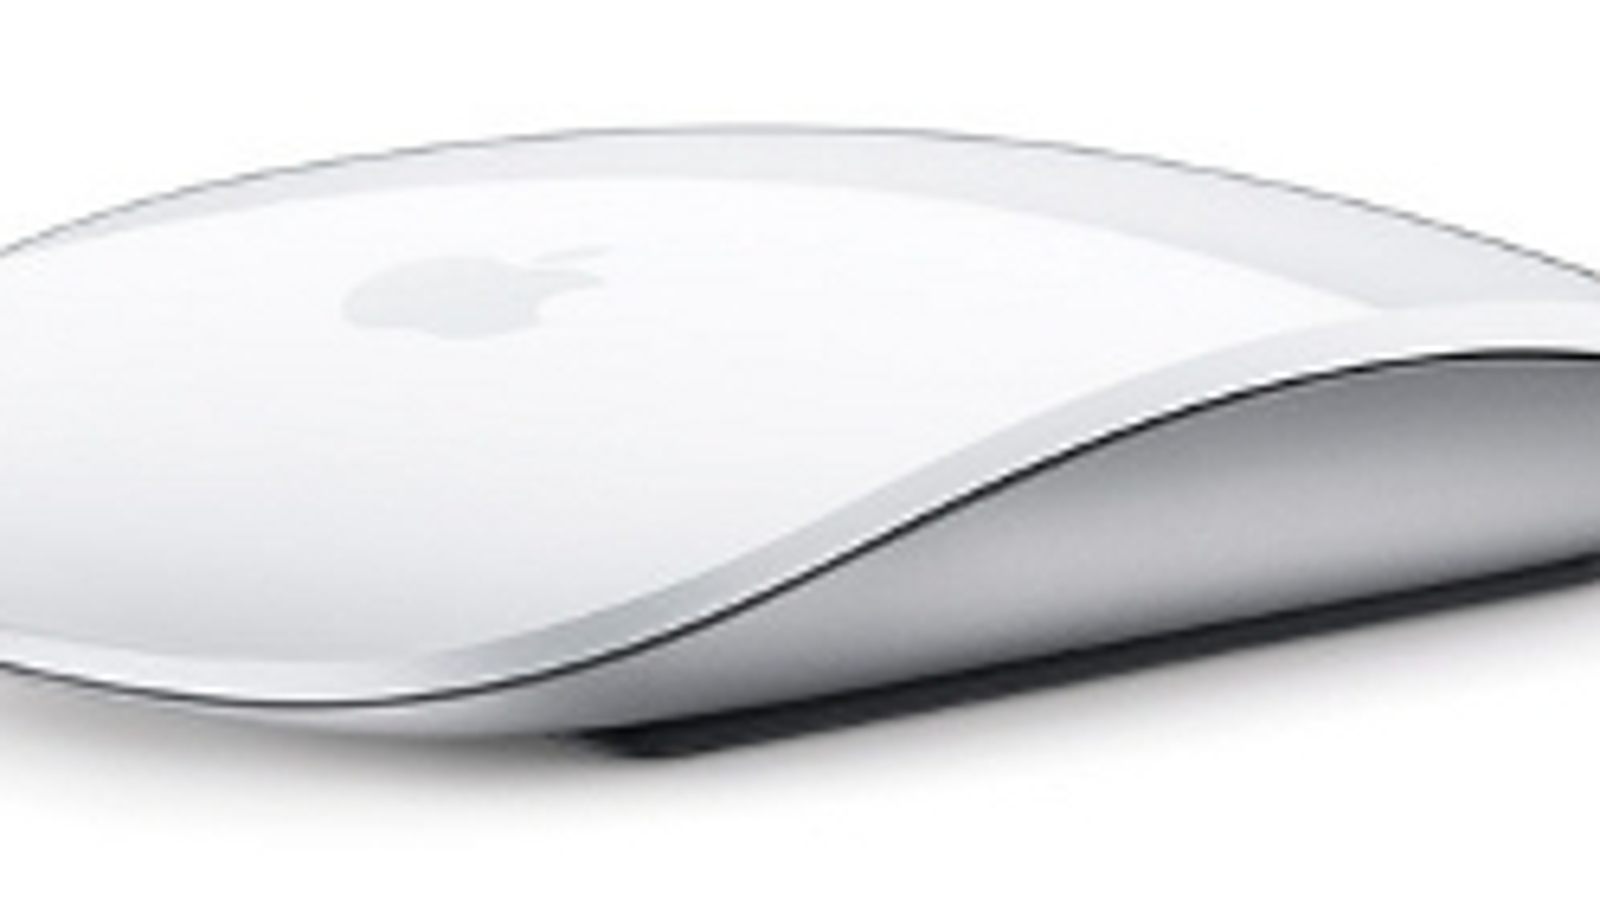 download magic mouse 2 utility for windows 10